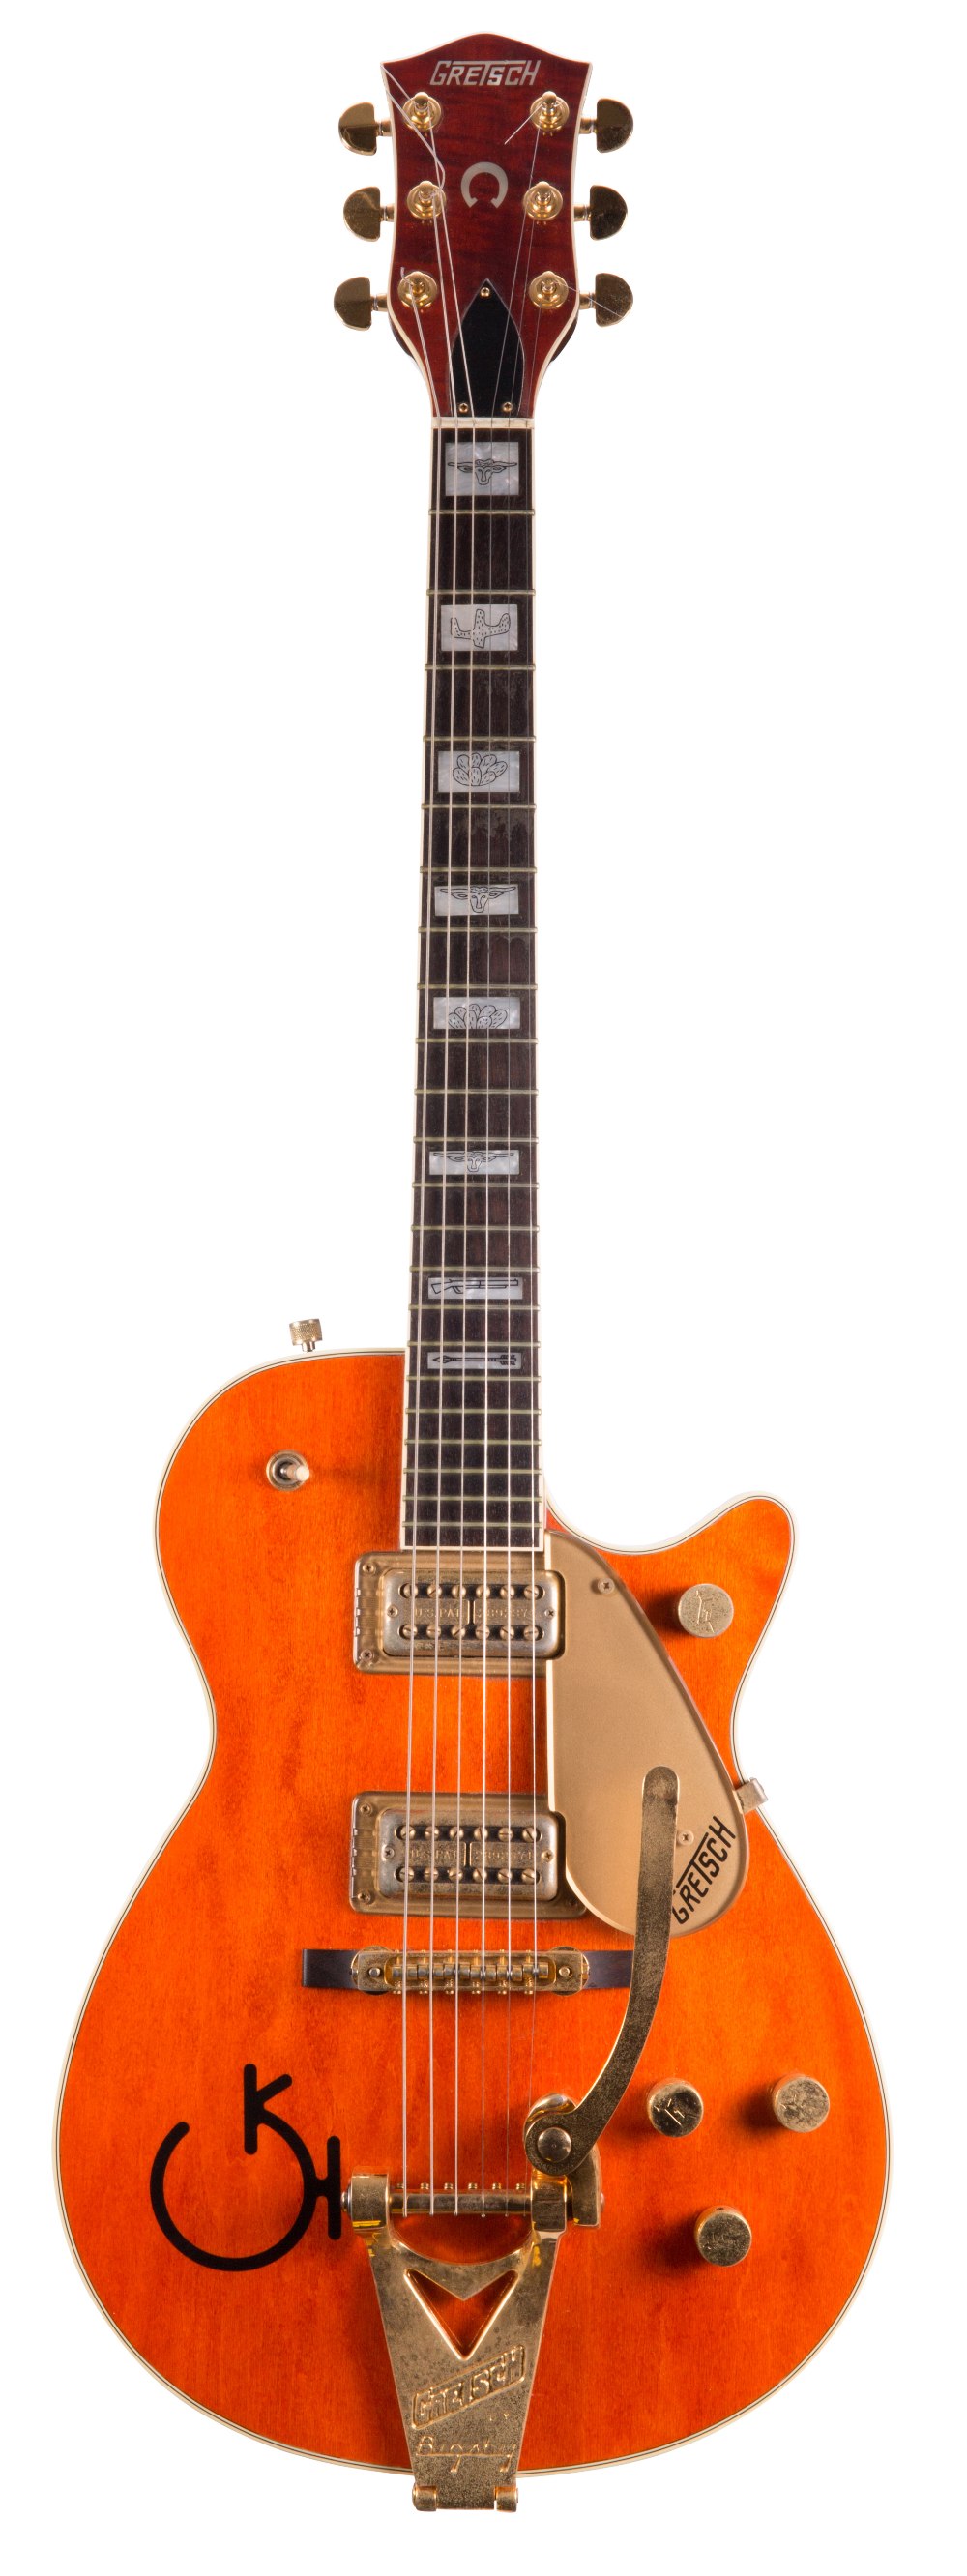 1990 Gretsch Roundup electric guitar, made in Japan, ser. no. 90xxxx-xx5; Finish: mahogany back